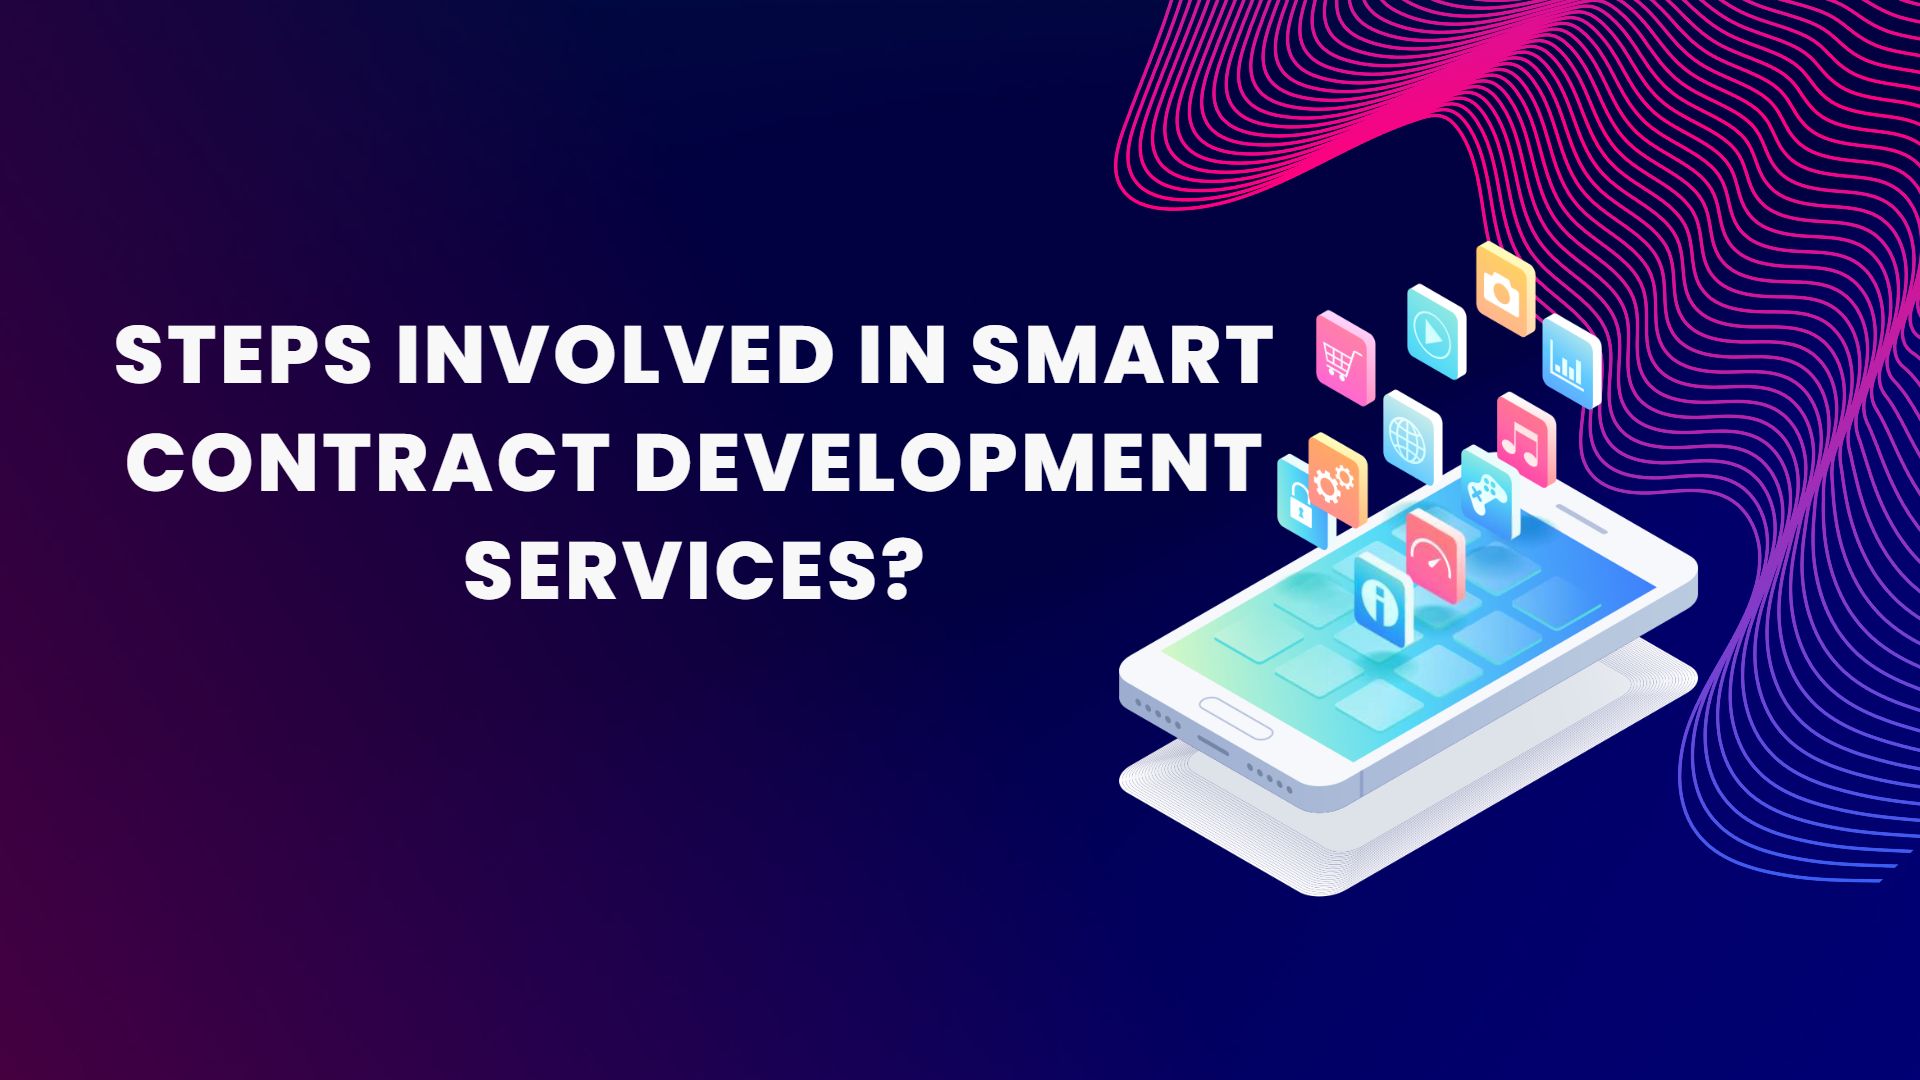 What Are the Steps Involved in Smart Contract Development Services